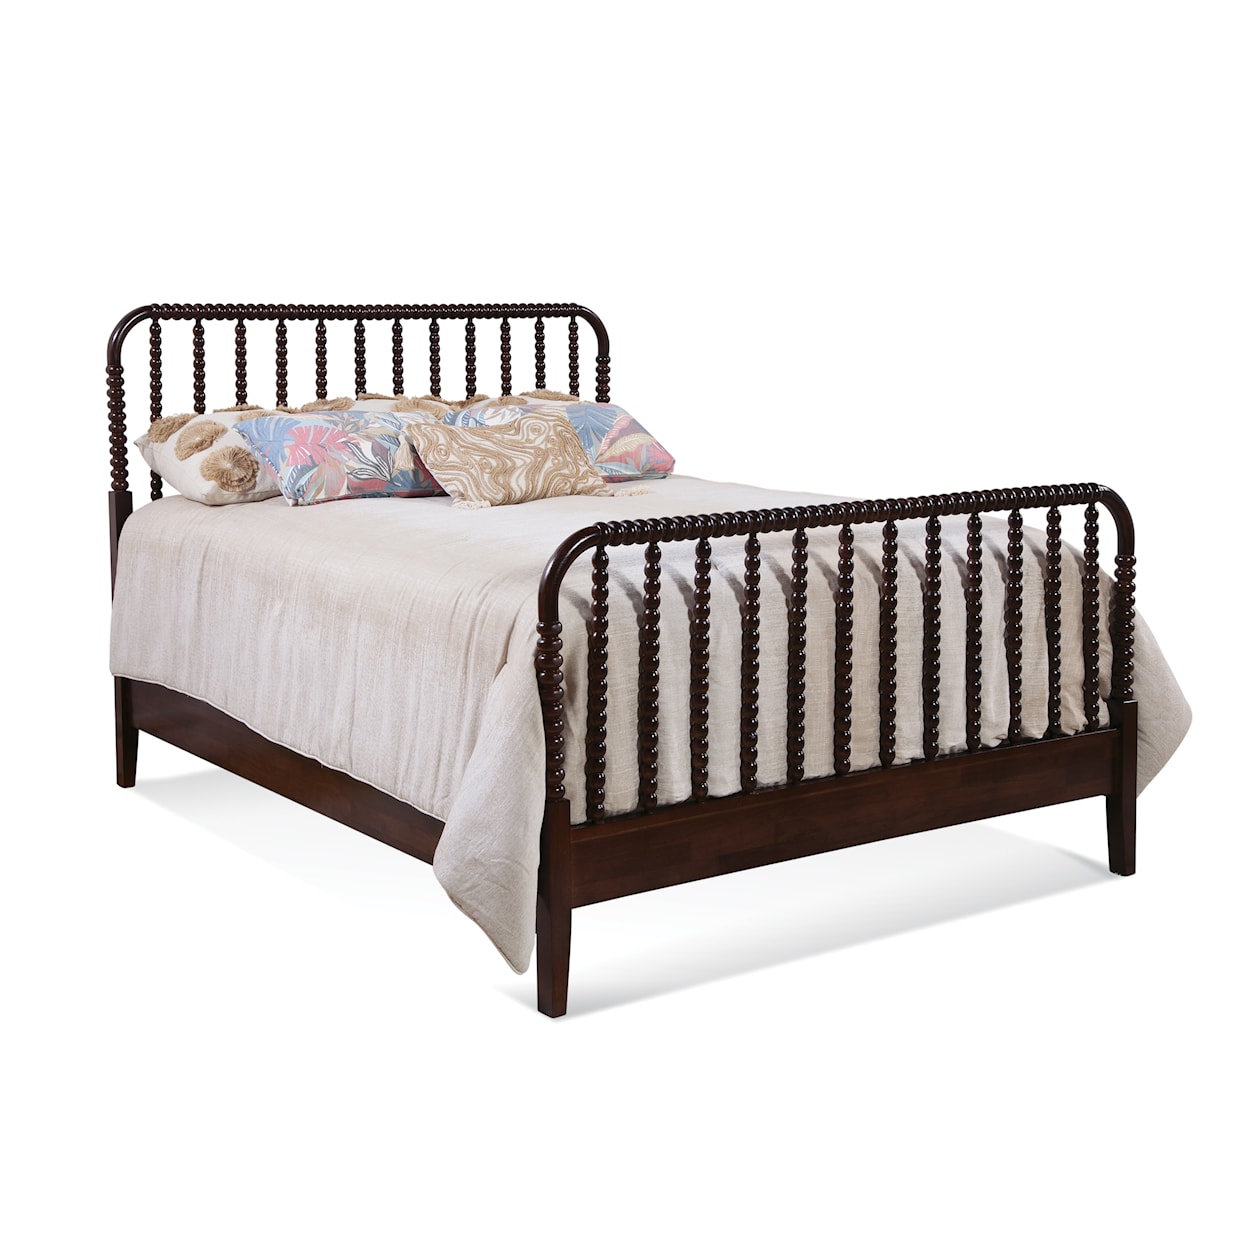 Braxton Culler Lind Island Lind Island Spindle Bed